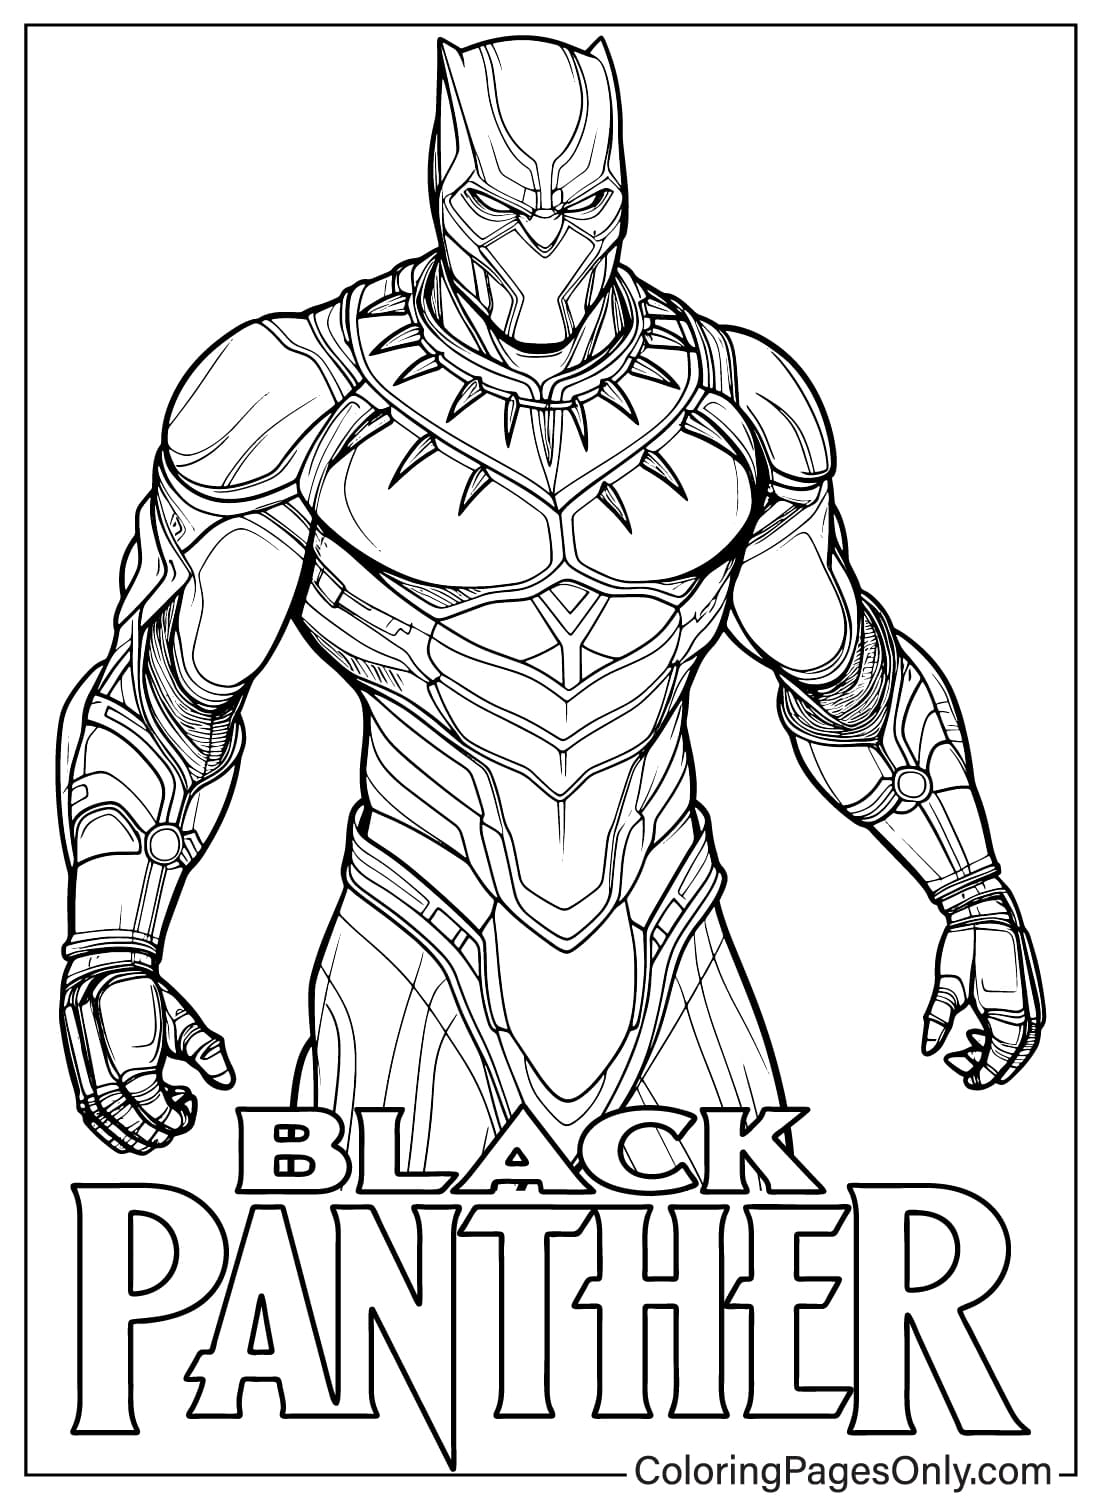 Black Panther Coloring Page Free from Black Panther